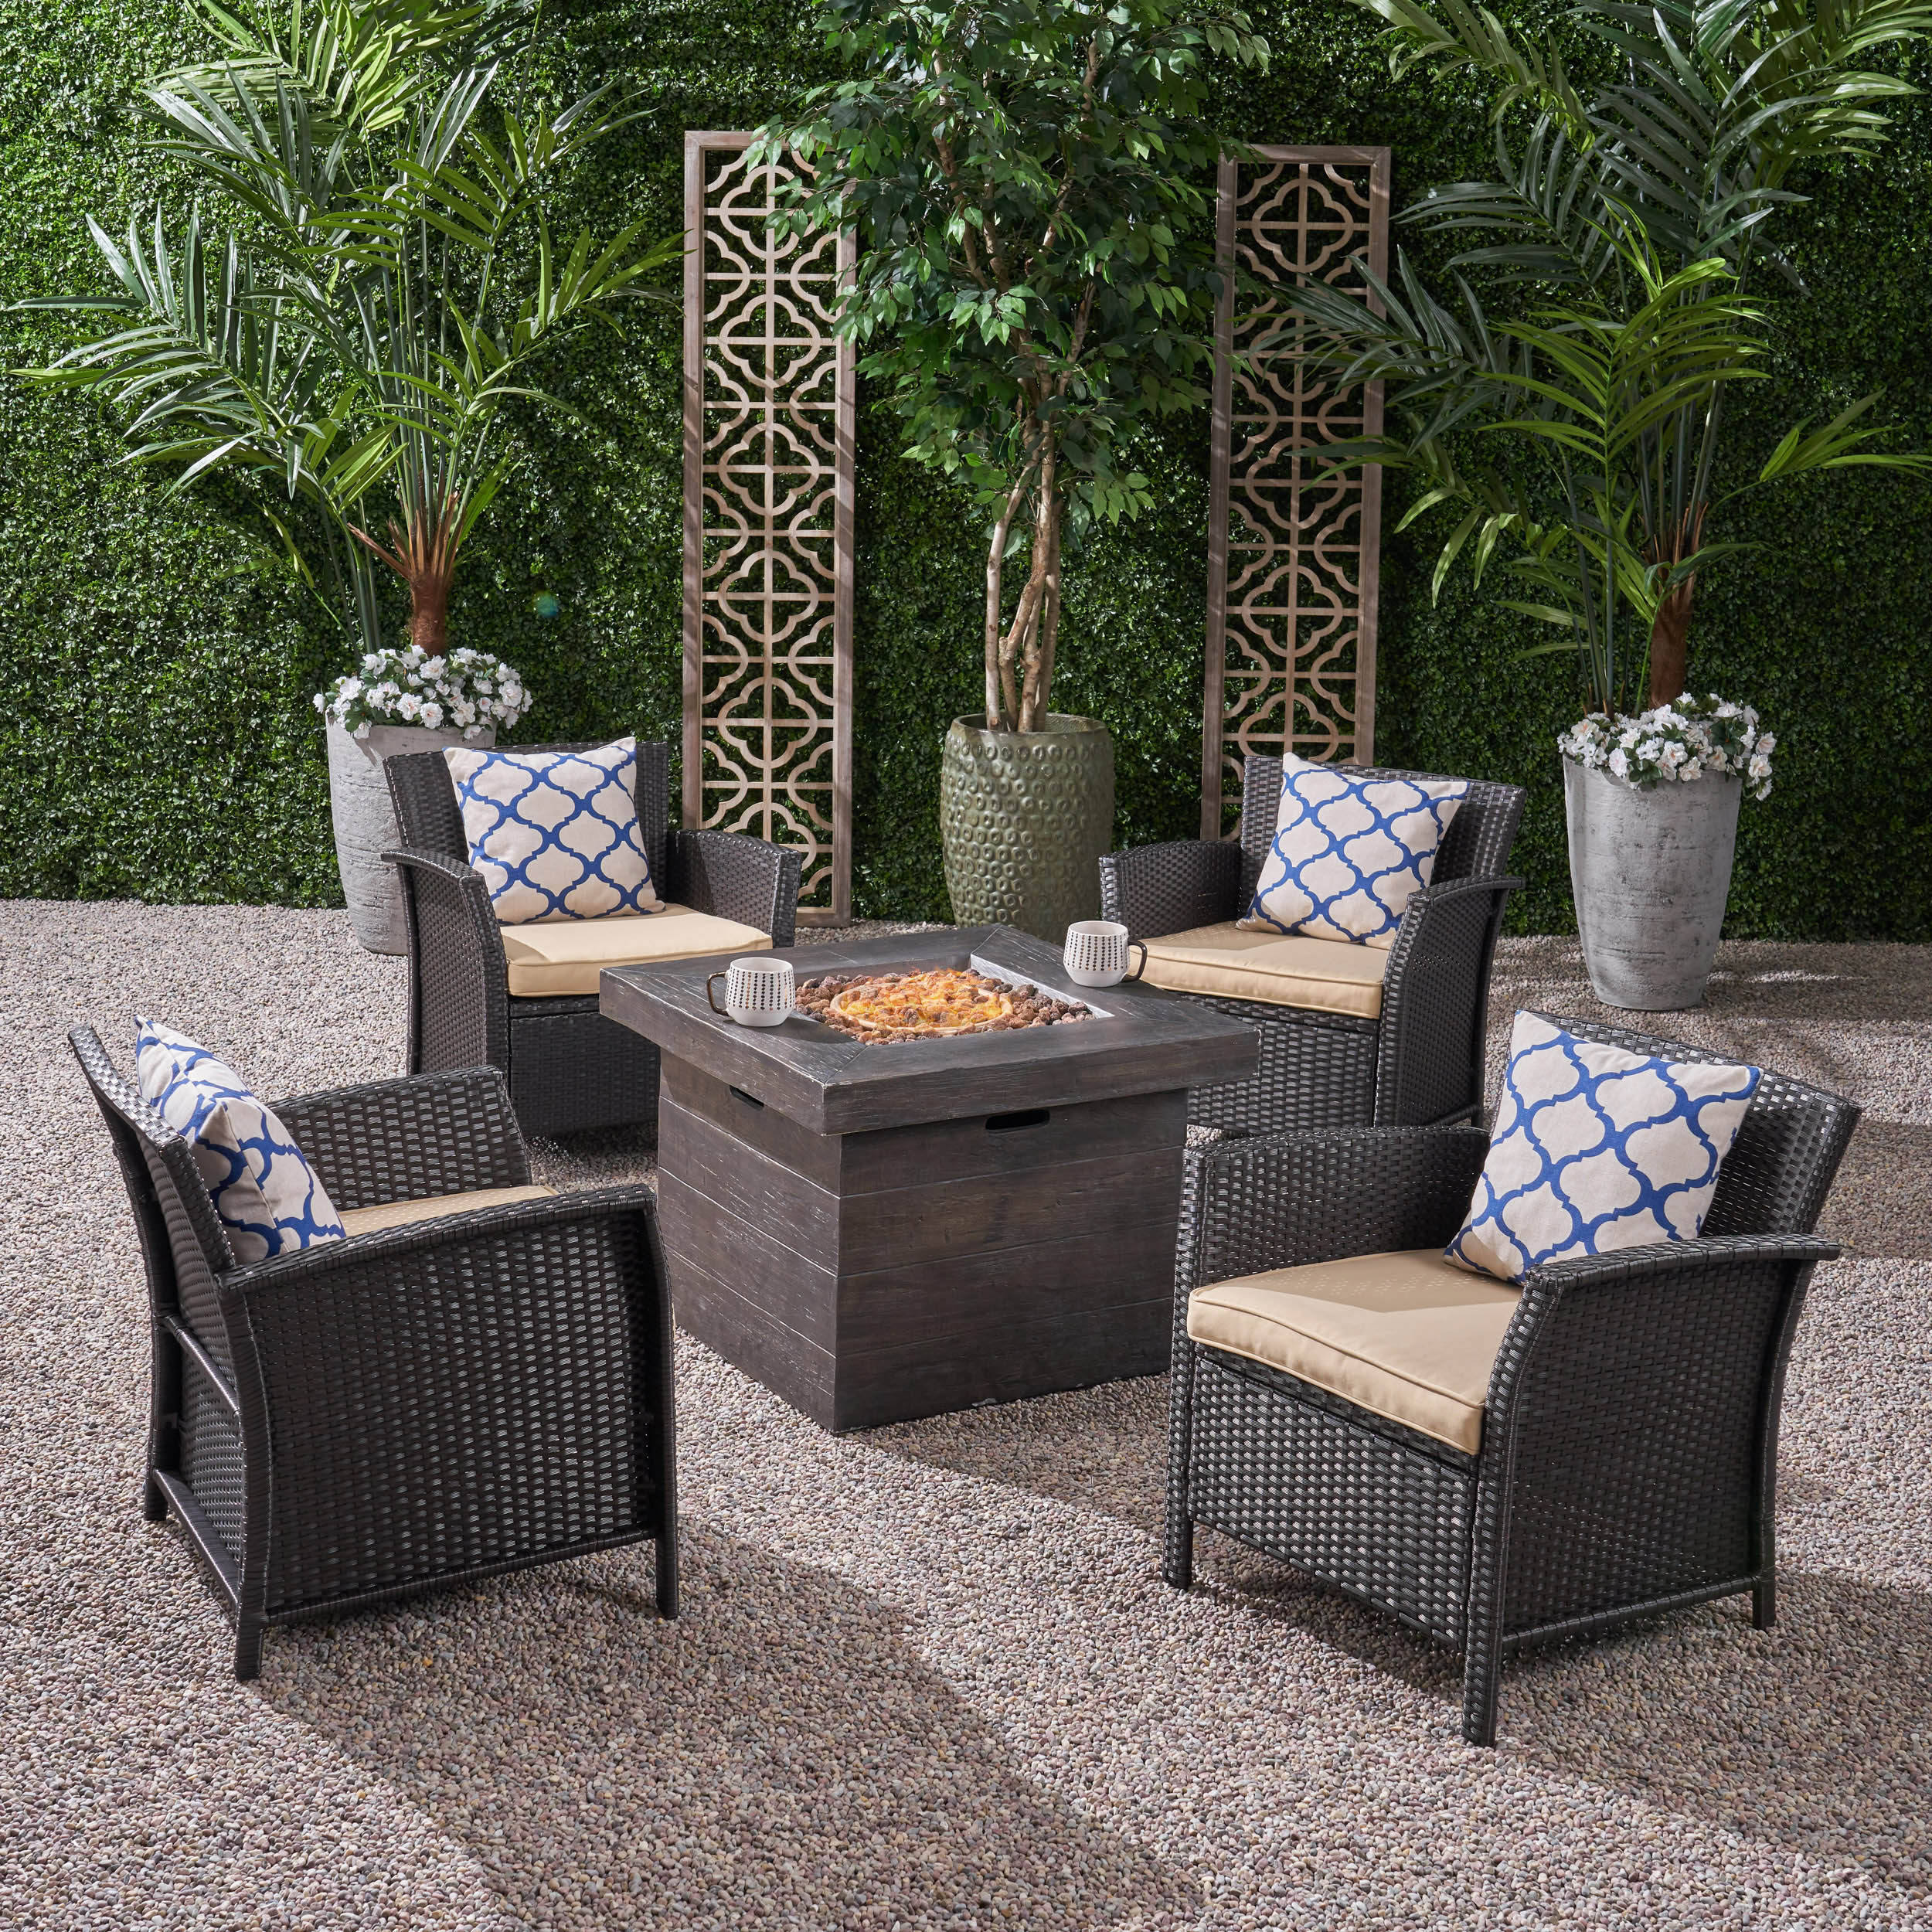 Anton Outdoor 5 Piece Wicker Chat Set with Cushions and Square Fire Pit, Brown, Tan, Brown - image 2 of 19